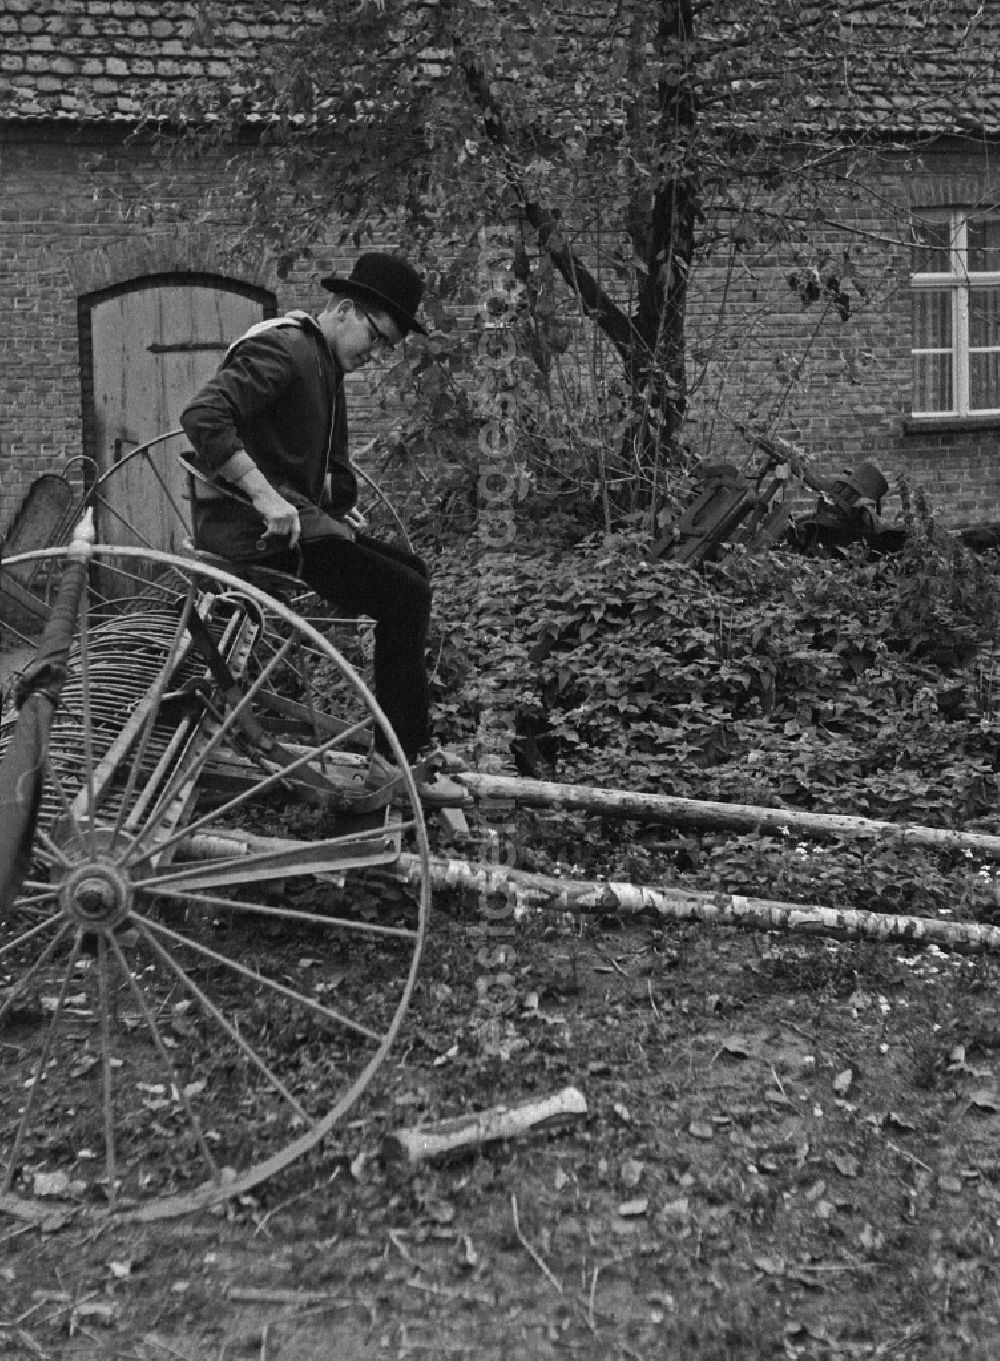 GDR picture archive: Werneuchen - Day preparation for the potato harvest for 9th grade students in Werneuchen, Brandenburg in the area of ??the former GDR, German Democratic Republic